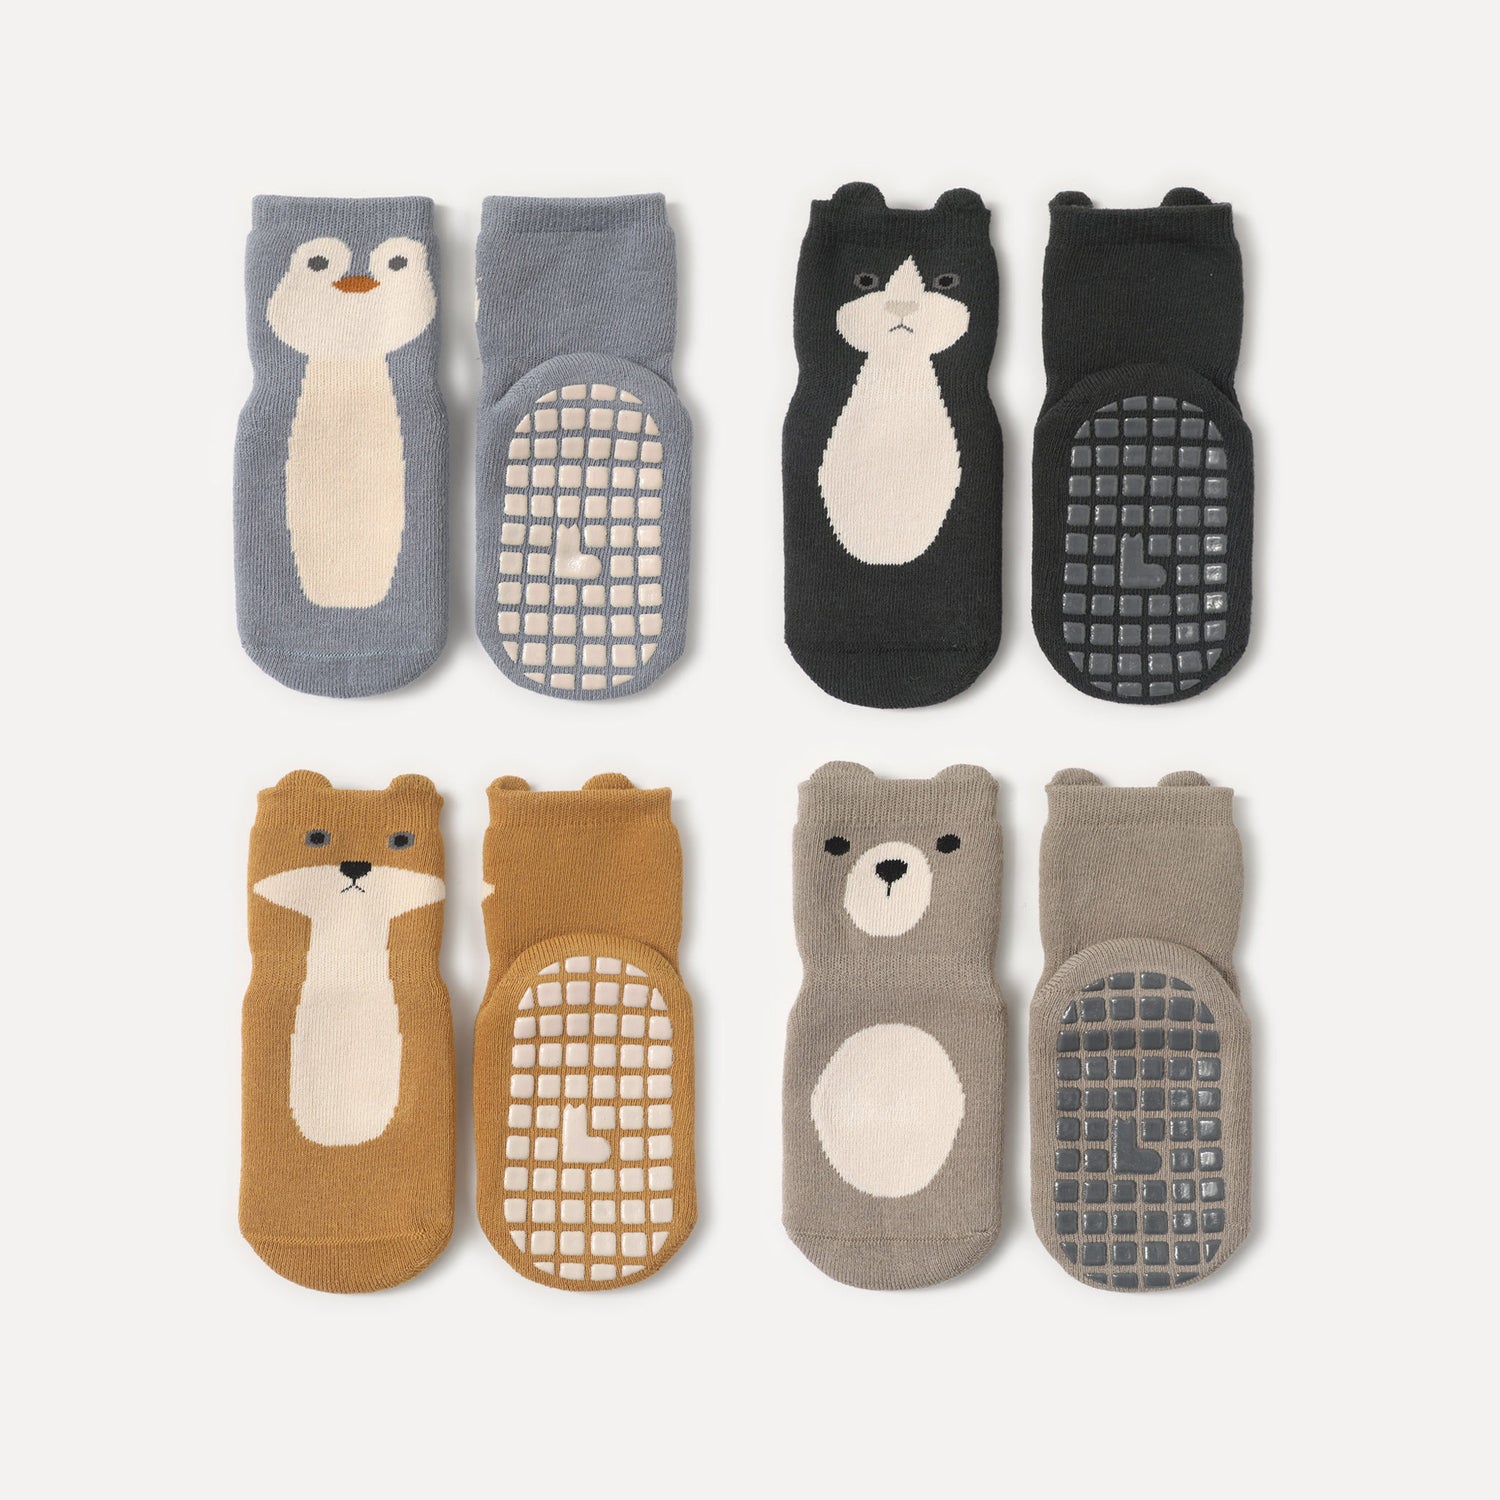 Soft and comfortable non-skid infant socks for all seasons